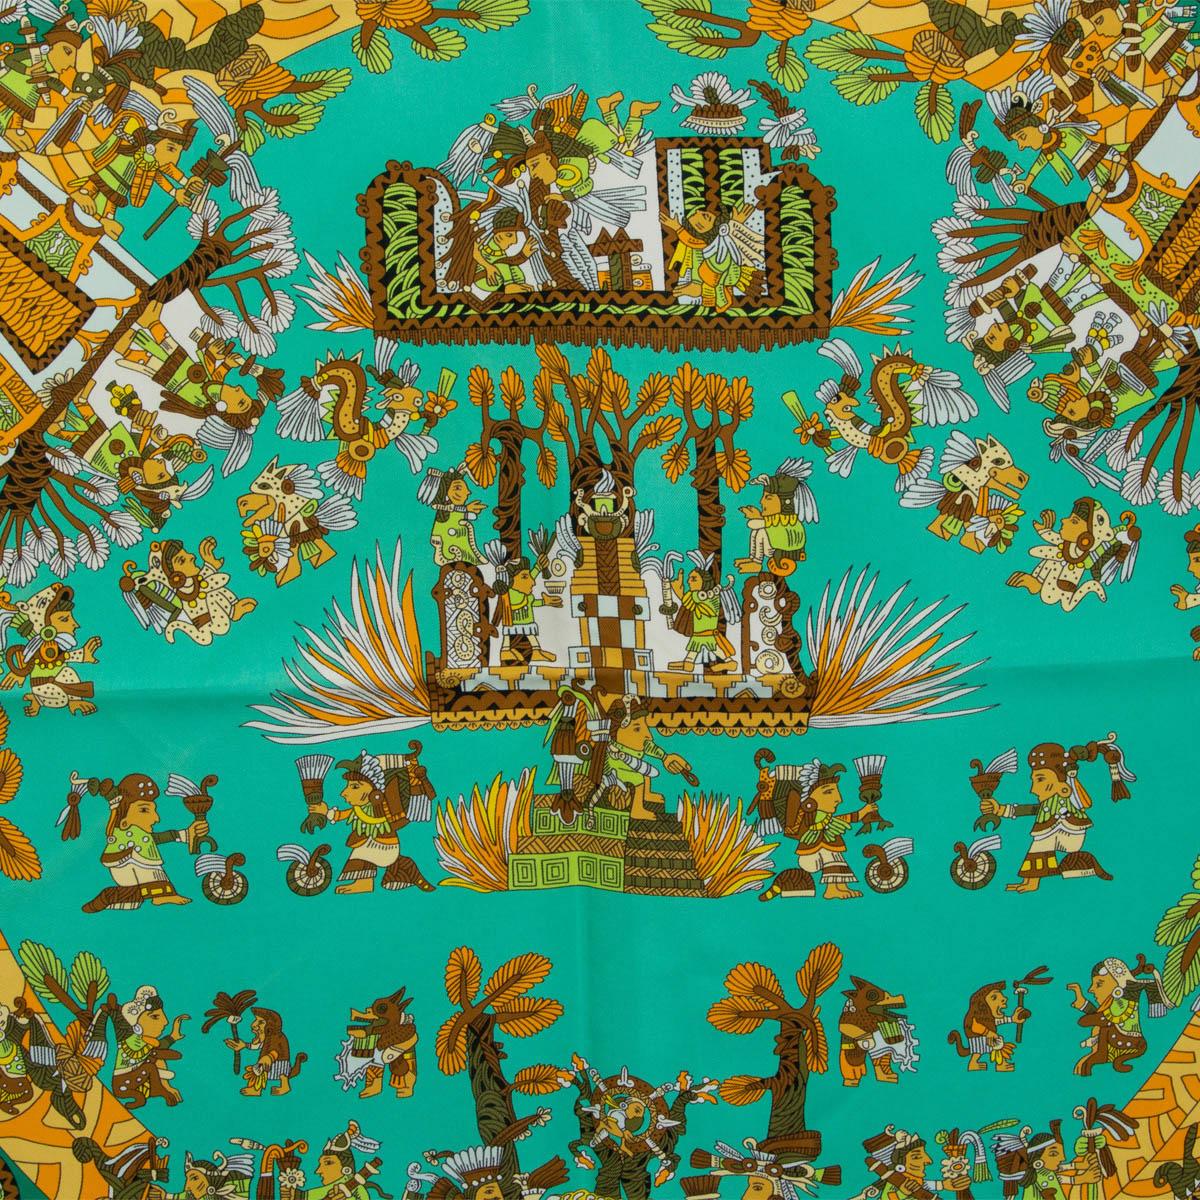 100% authentic Hermès 'Astres et Soeils 90' scarf by Annie Faivre in turquoise silk twill (100%) with contrasting dark green hem and details in green, brown, orange and gold. Has been worn and is in excellent condition.

Measurements
Width	90cm